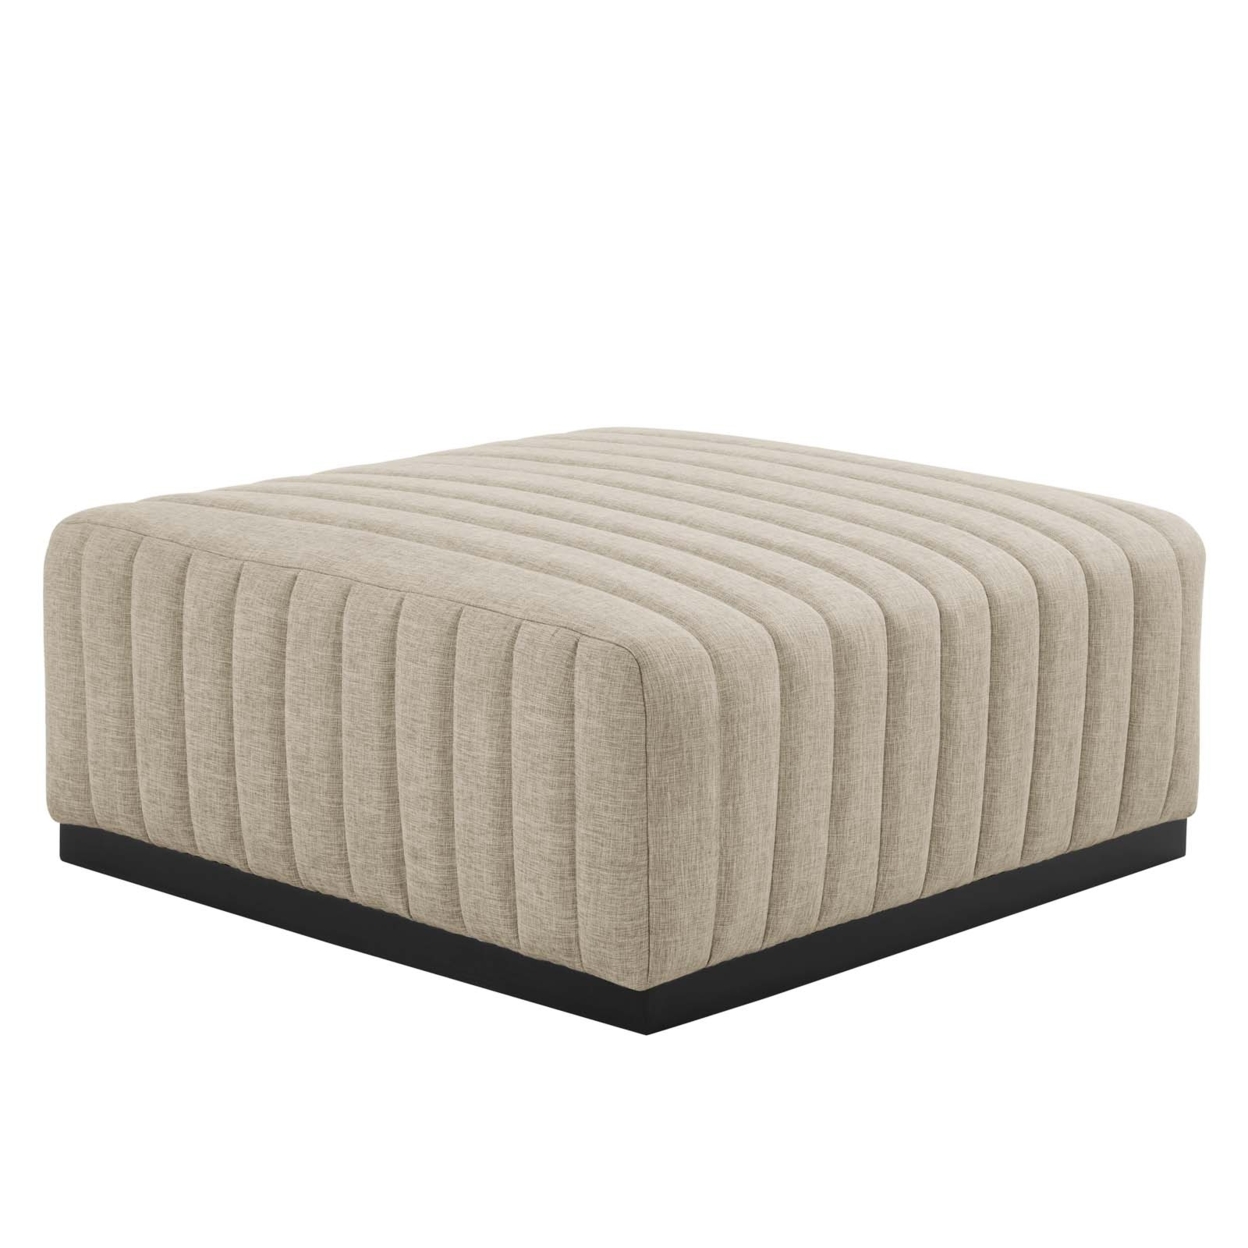 Conjure Channel Tufted Upholstered Fabric Ottoman, Black Beige